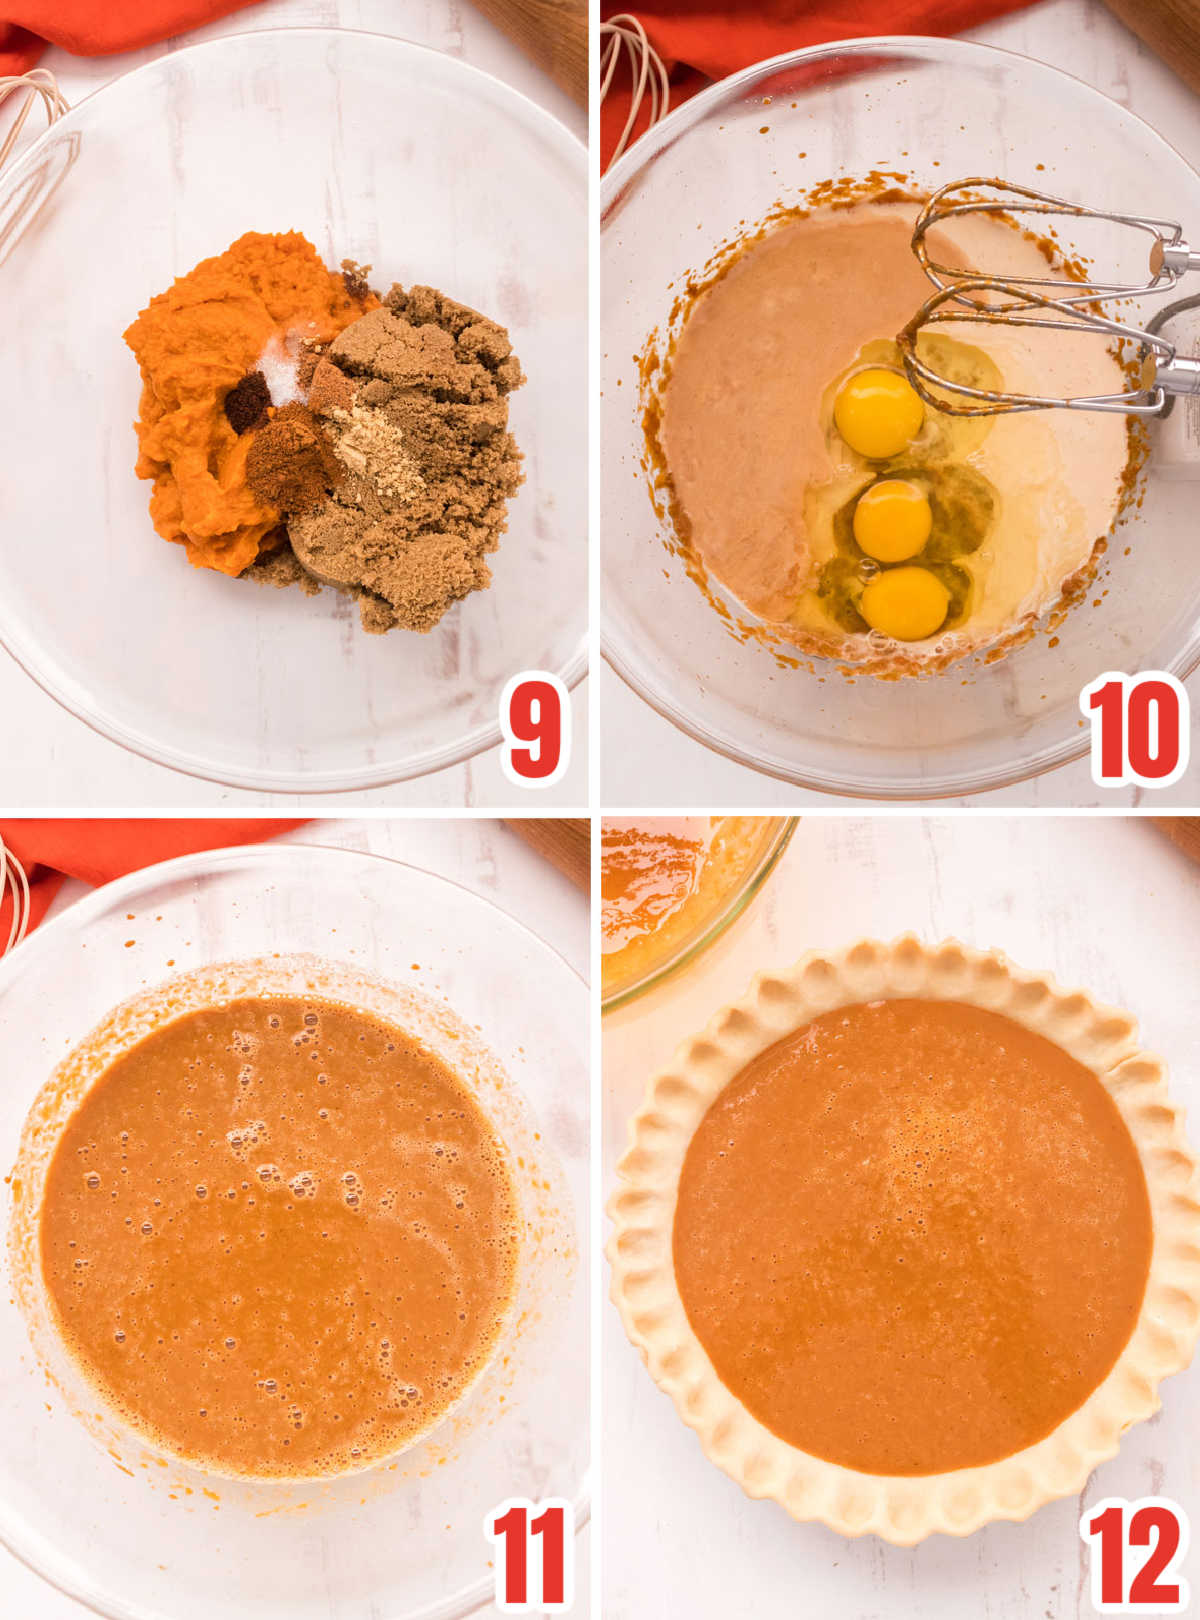 Collage image showing the steps for making the Sweet Potato pie filling.